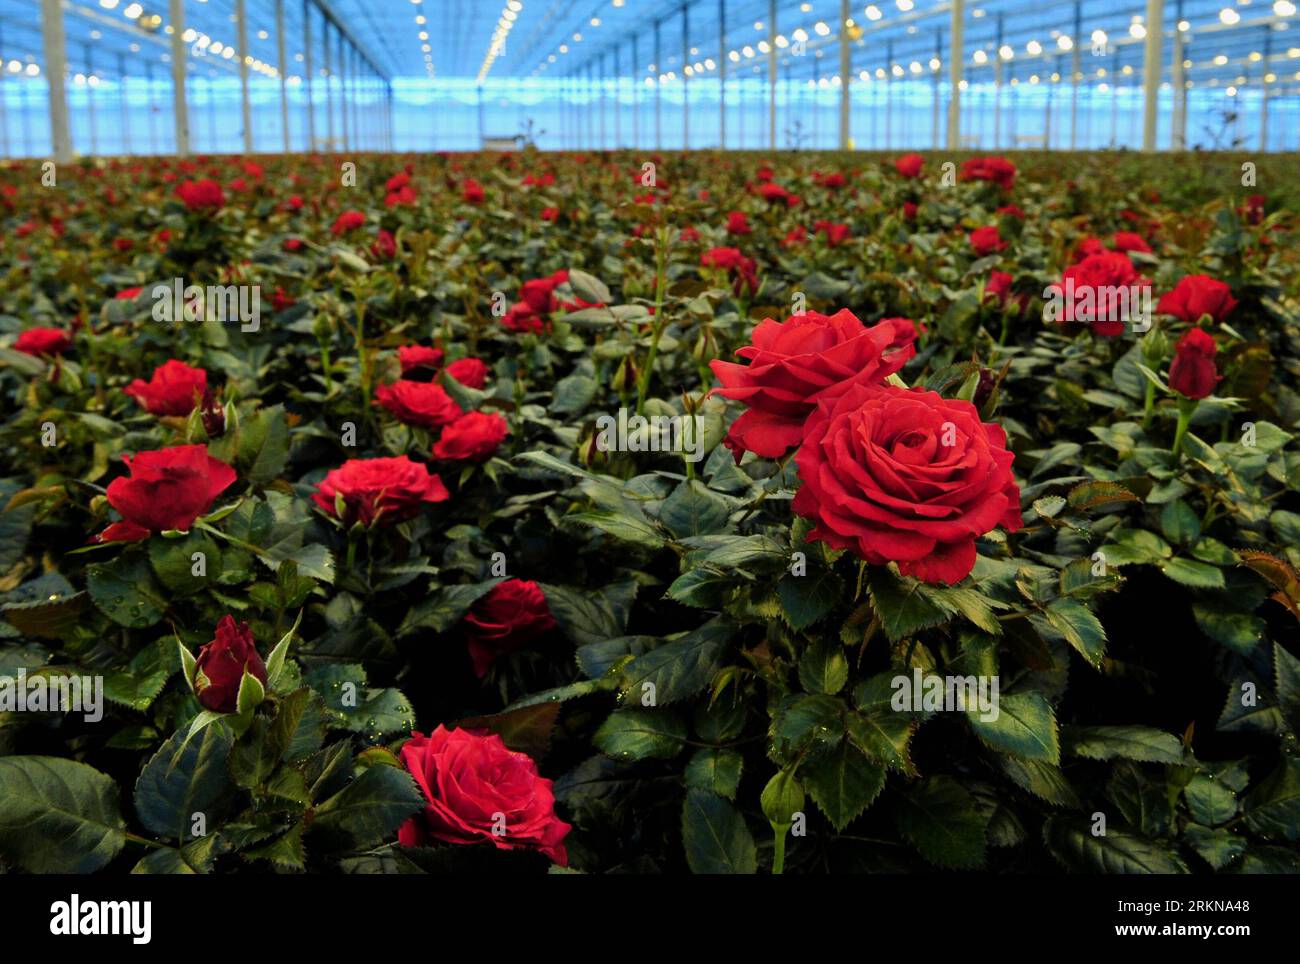 Bildnummer: 57060117  Datum: 12.02.2012  Copyright: imago/Xinhua (120212) -- AALSMEER, Feb. 12, 2012 (Xinhua) -- Roses are seen in an automatic greenhouse in Aaslmeer, the Netherlands, Feb. 8, 2012. FloraHolland flower auction, the world s largest auction organization, processes over 12 billion flowers and plants a year, fulfilling the role of matchmaker, intermediary and knowledge center. Aalsmeer flower auction center is the largest among its six national and international marketplaces respectively in Aalsmeer, Naaldwijk, Rijnsburg, Venlo, Bleiswijk and Eelde. Aalsmeer flower auction center Stock Photo